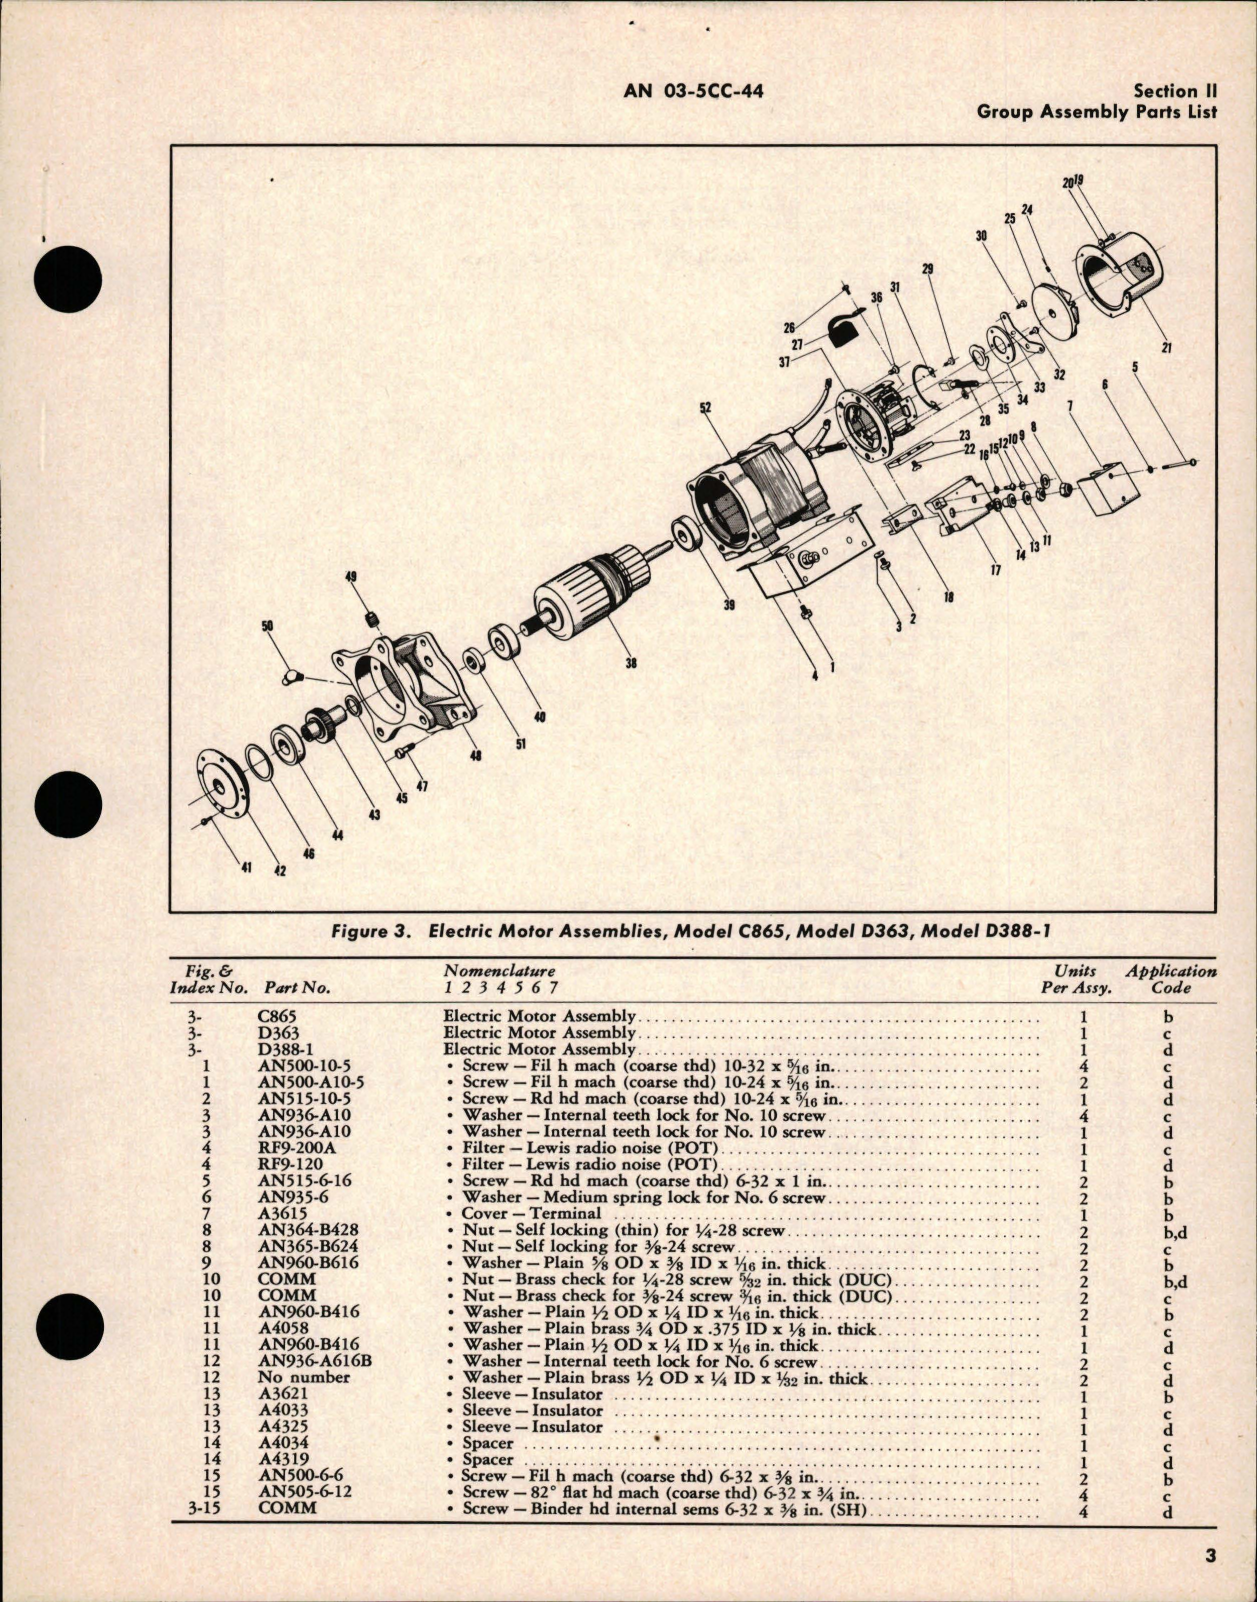 Sample page 7 from AirCorps Library document: Parts Catalog for Electric Motors - Models C583, C865, D289C, D363, D378, D388-1, D403